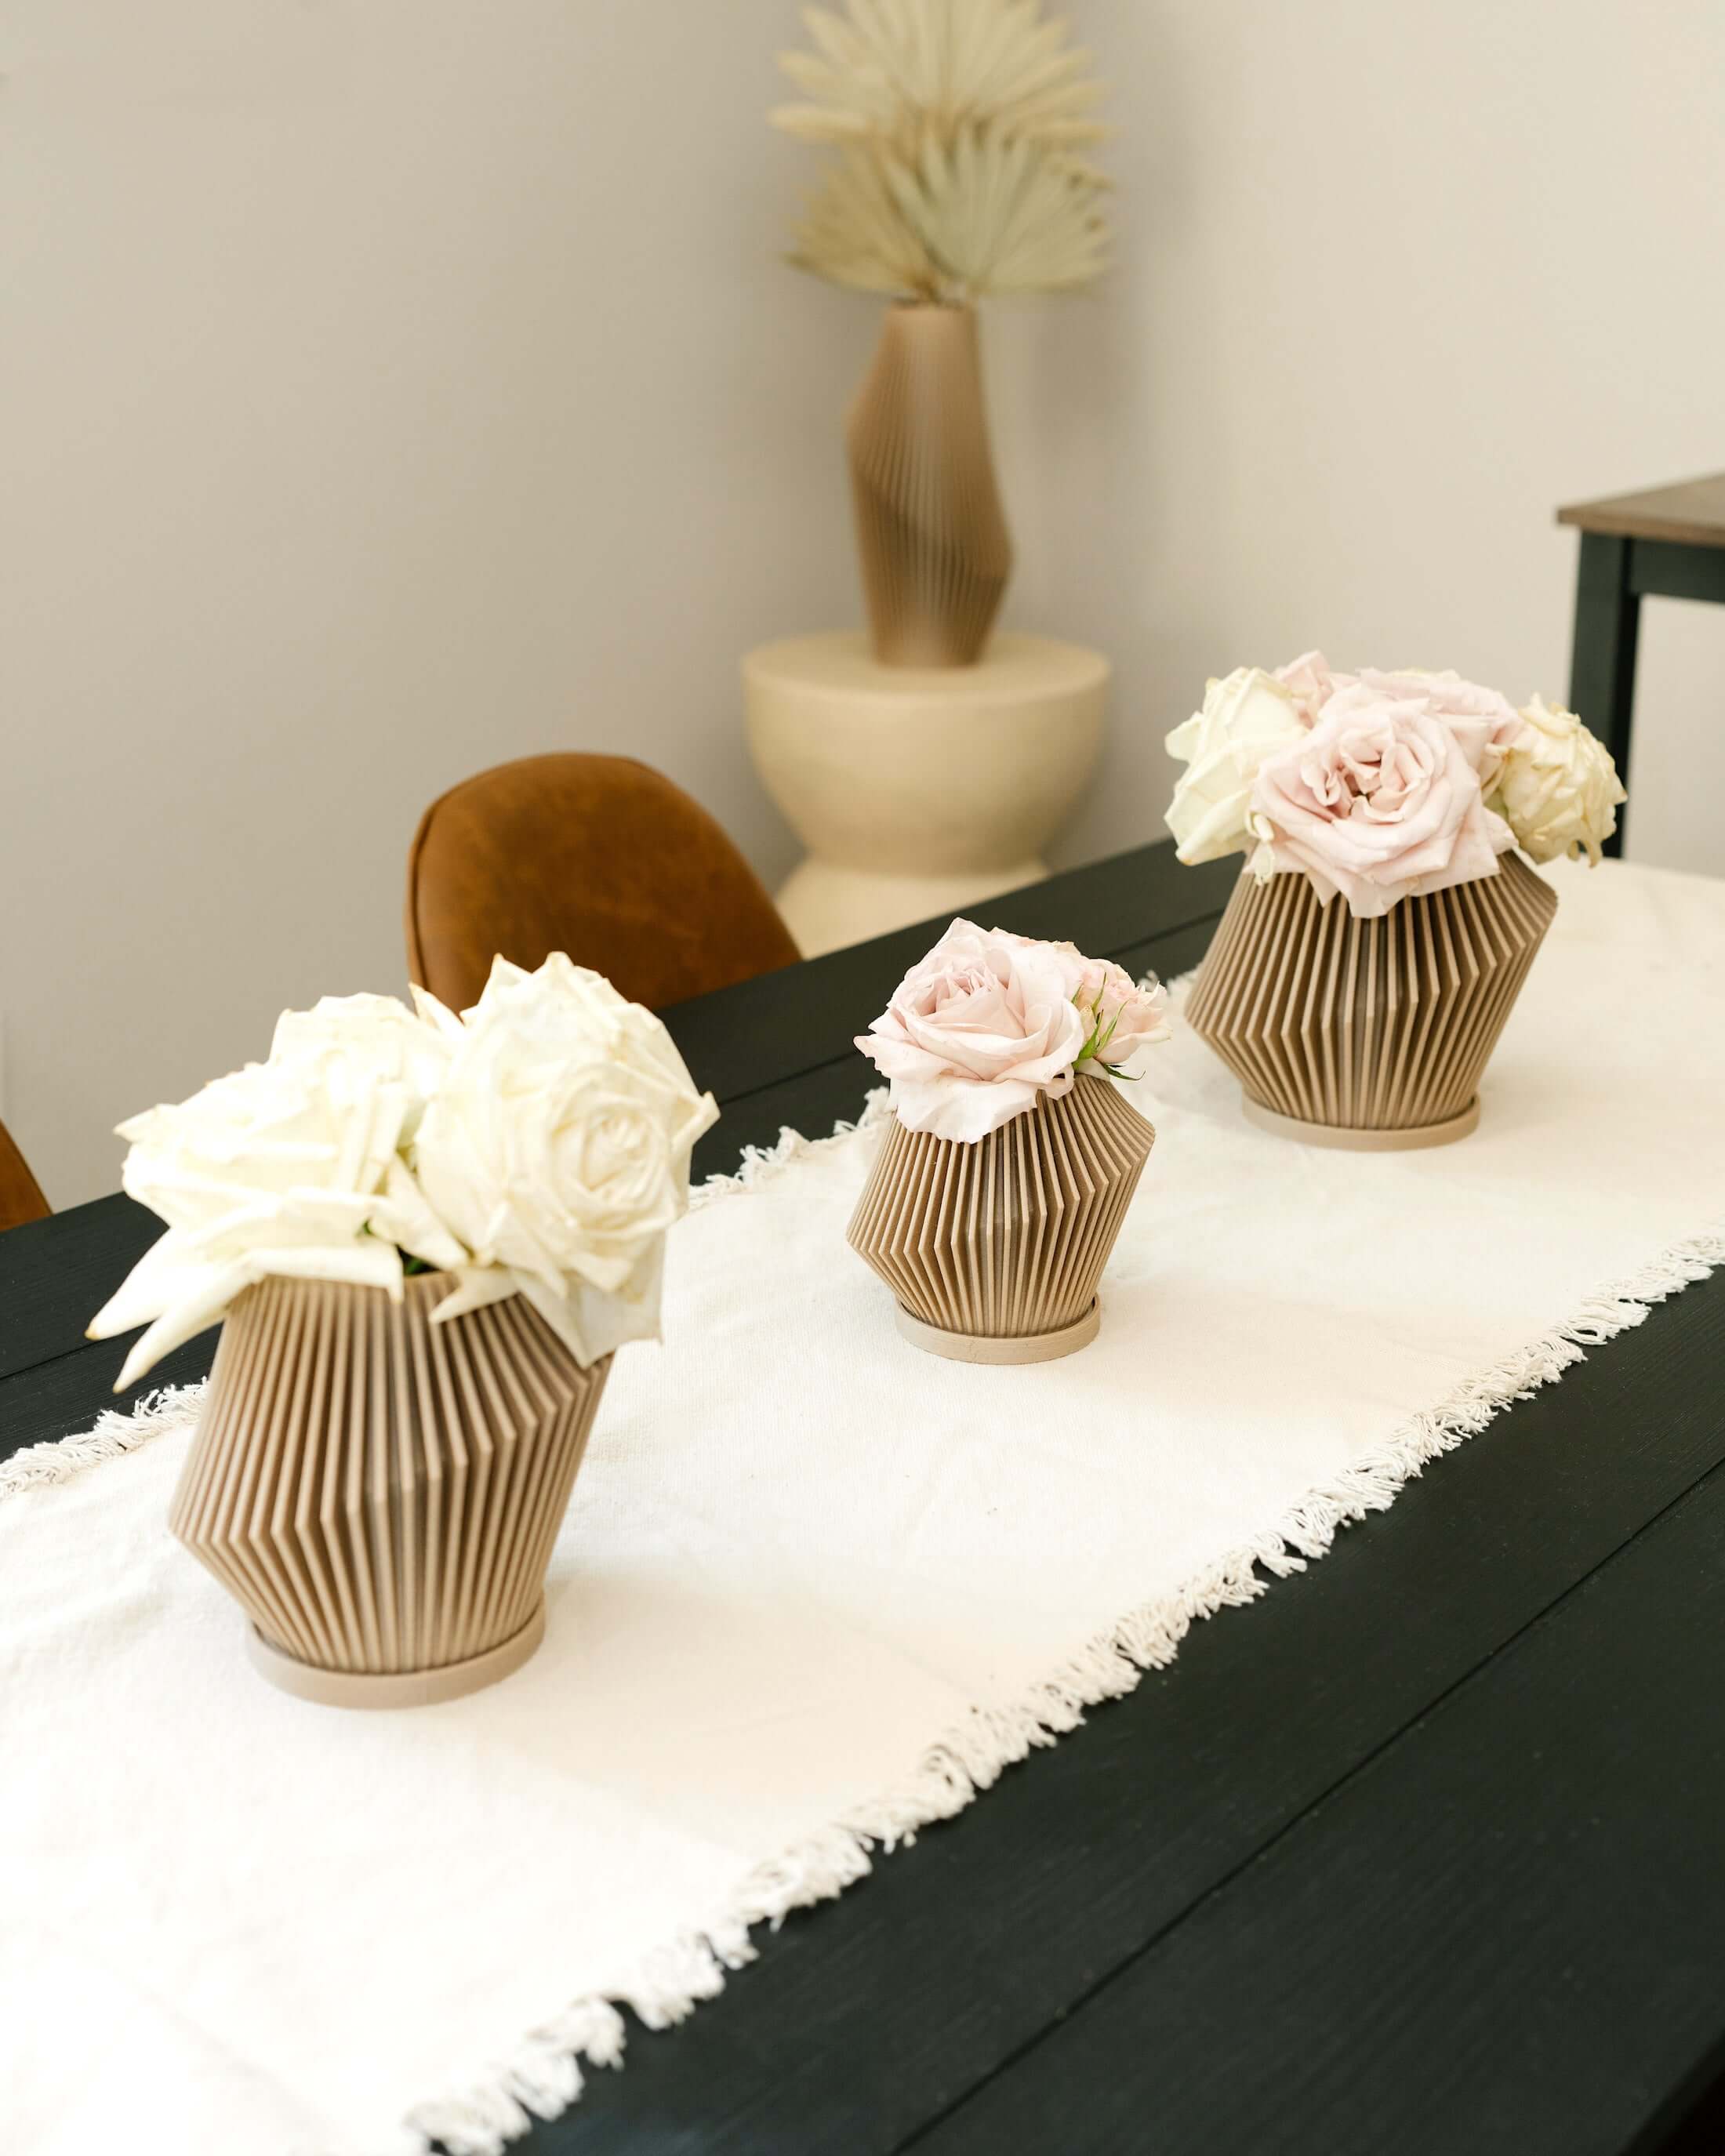 Set of three beige DISC small flowerpots with roses on a white table runner.